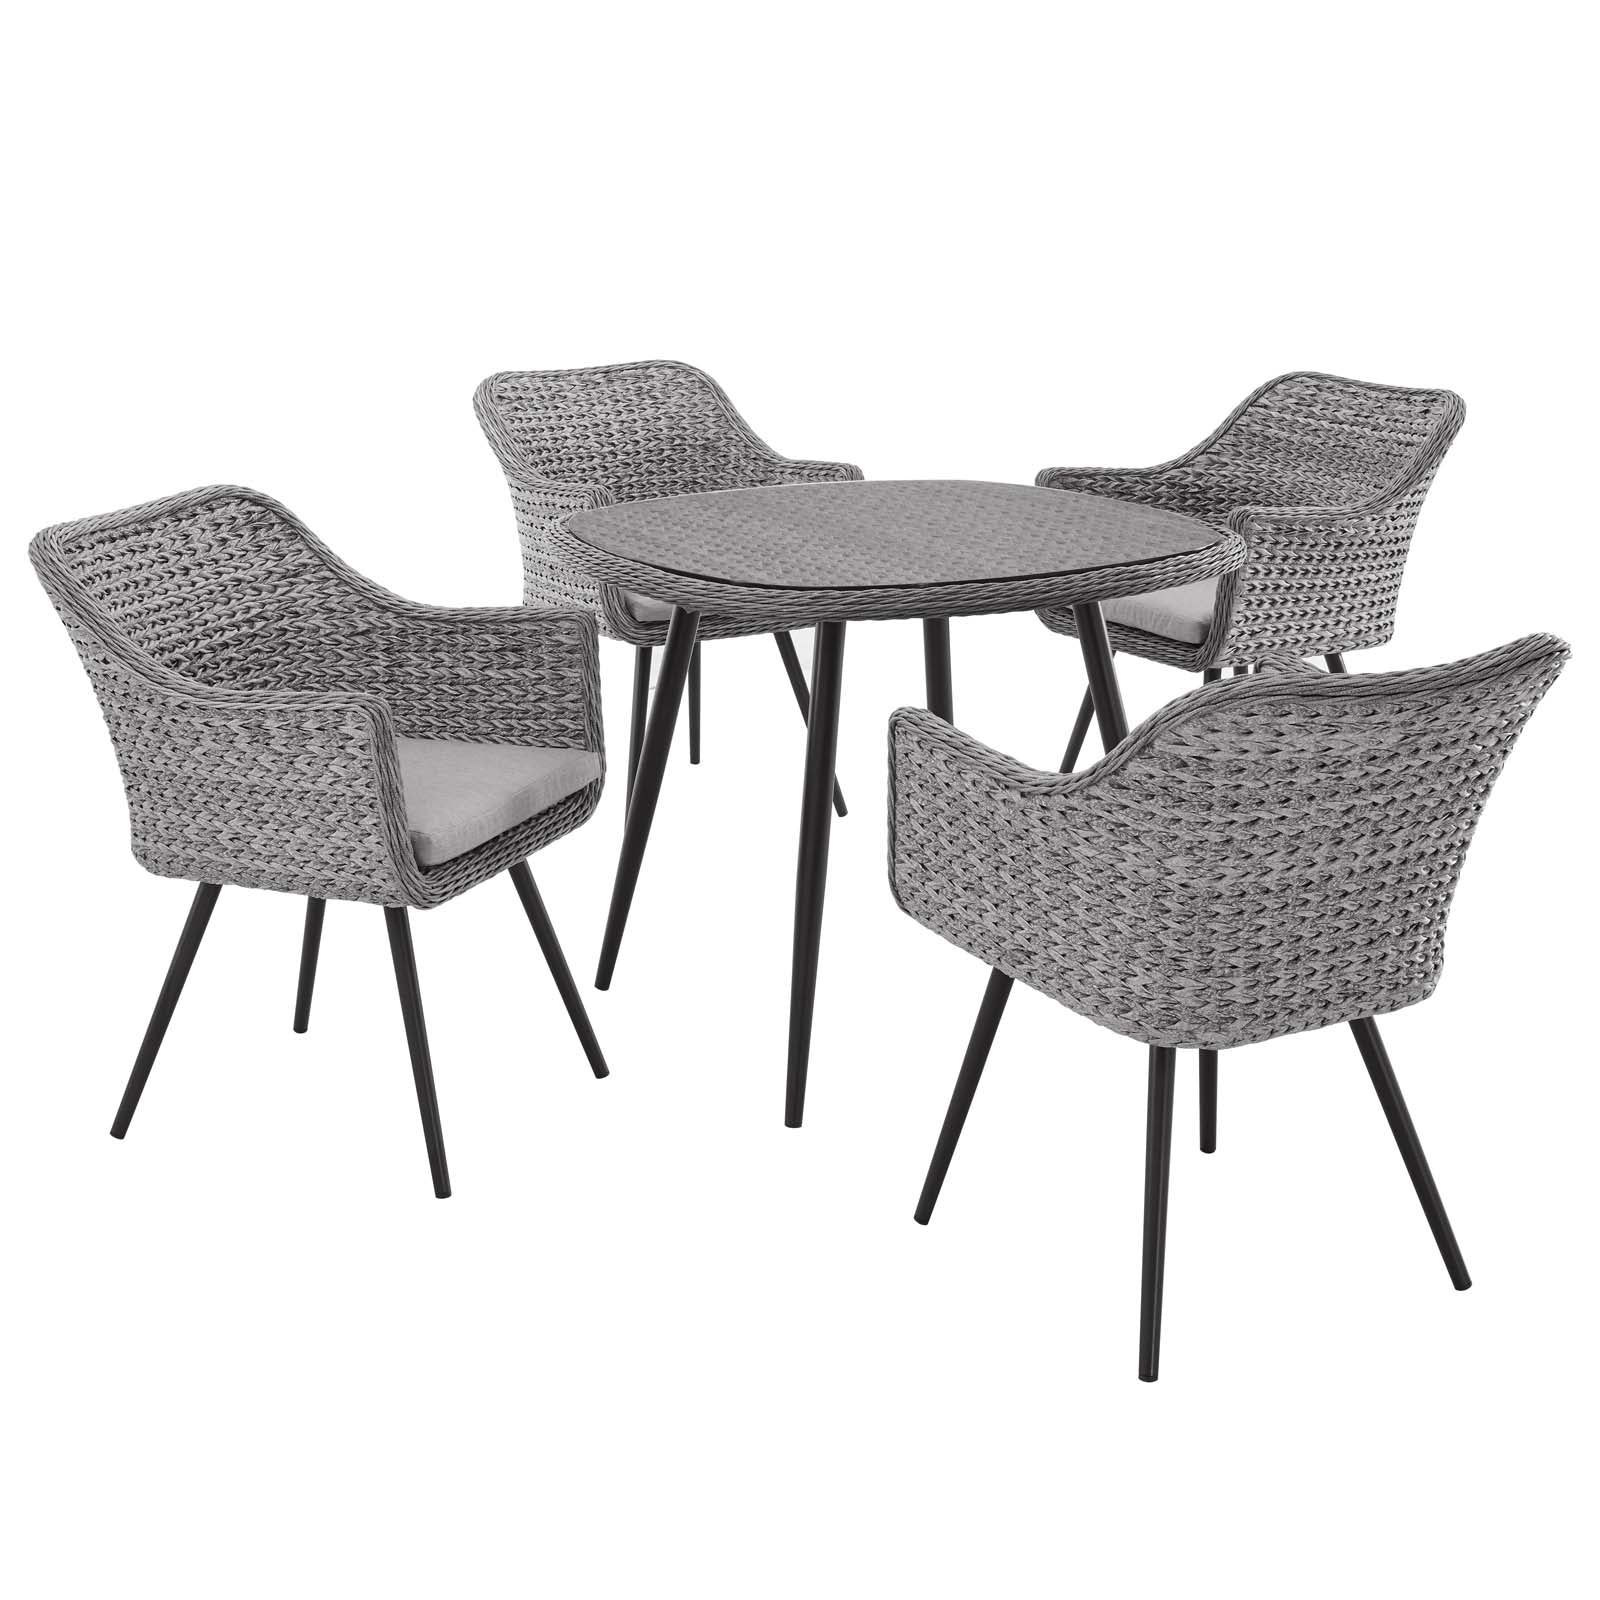 Endeavor 5 Piece Outdoor Patio Wicker Rattan Dining Set - East Shore Modern Home Furnishings